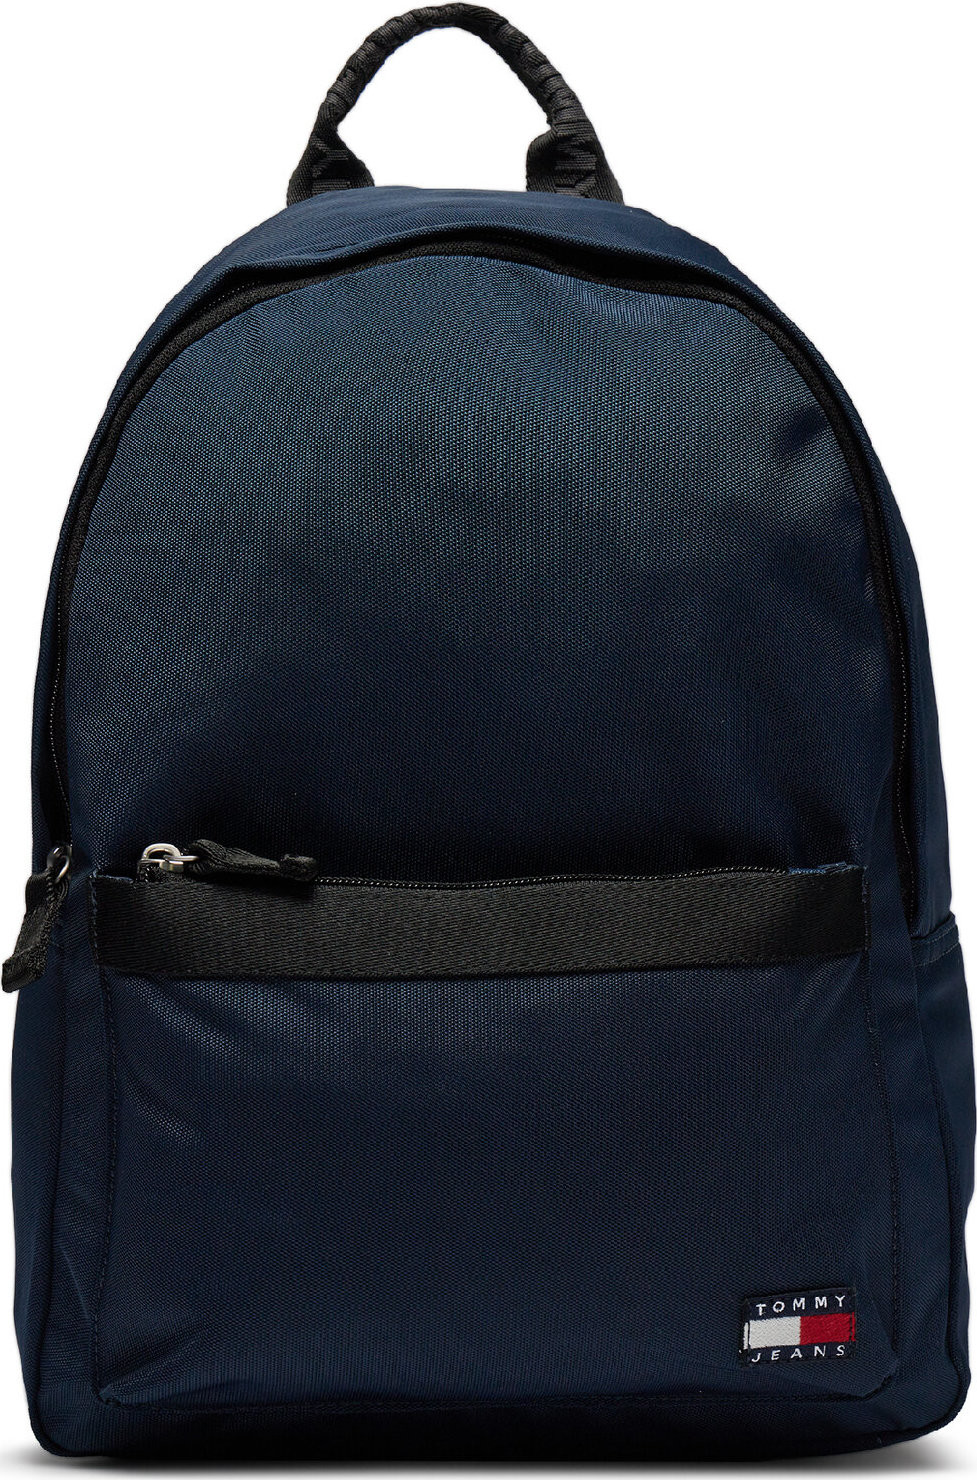 Batoh Tommy Jeans Tjw Ess Daily Backpack AW0AW15816 Dark Night Navy C1G